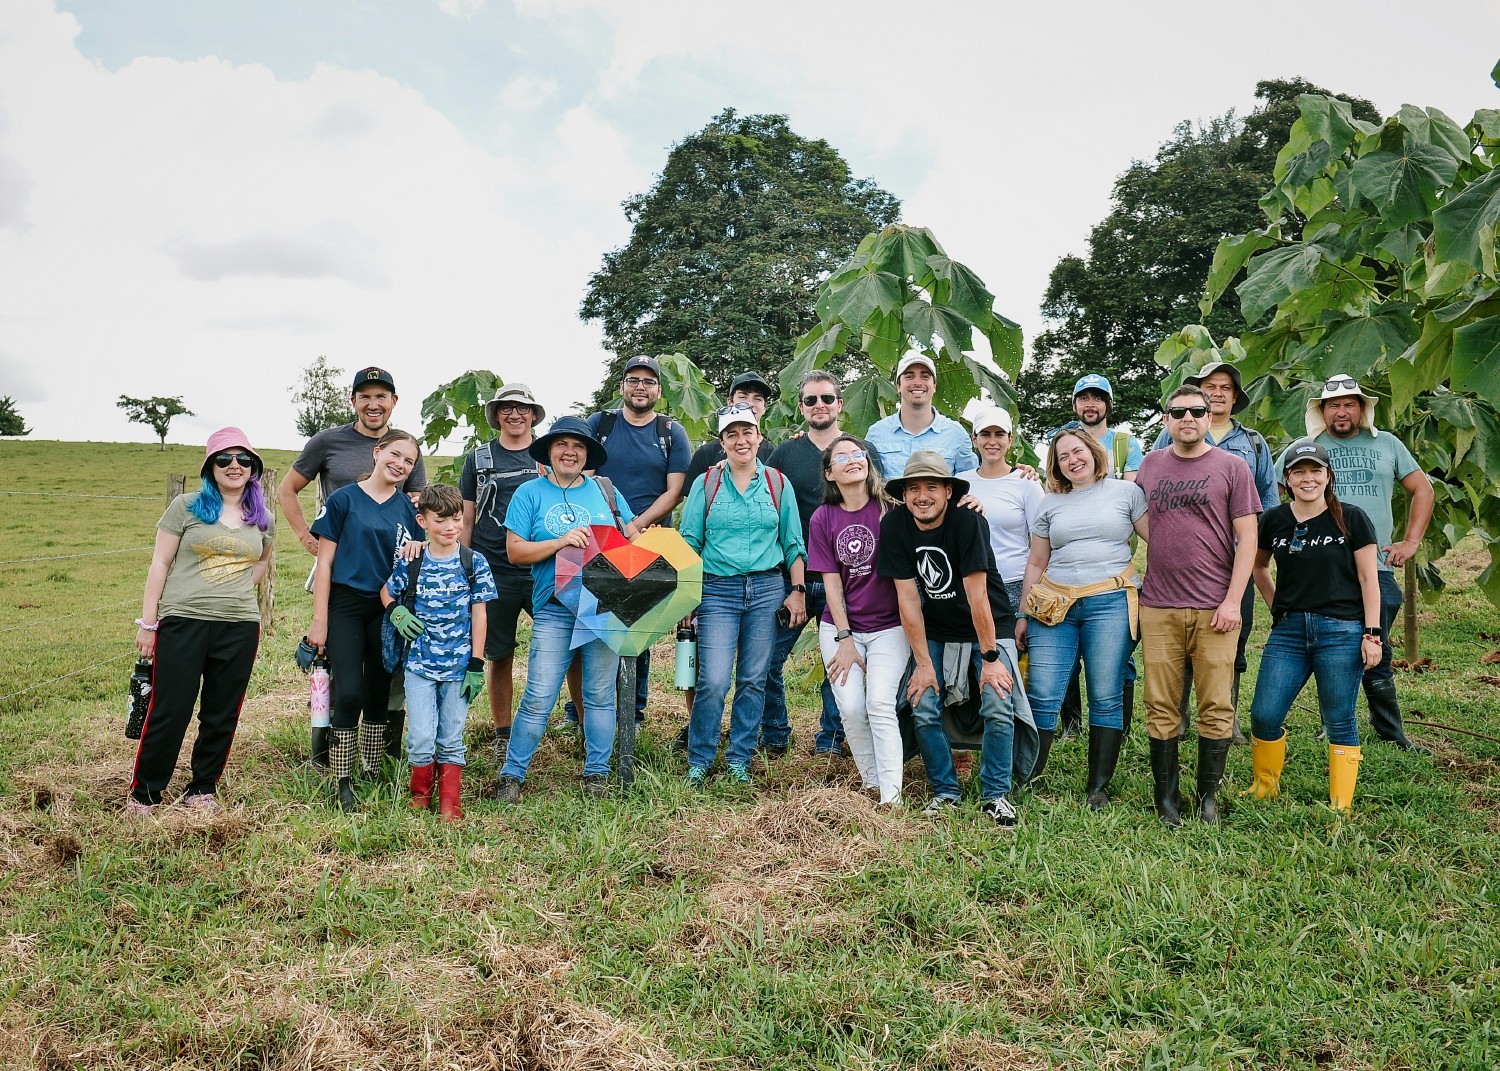 The SweetRush team supports our La Maestra reforestation project in Costa Rica, planting trees in our growing forest!